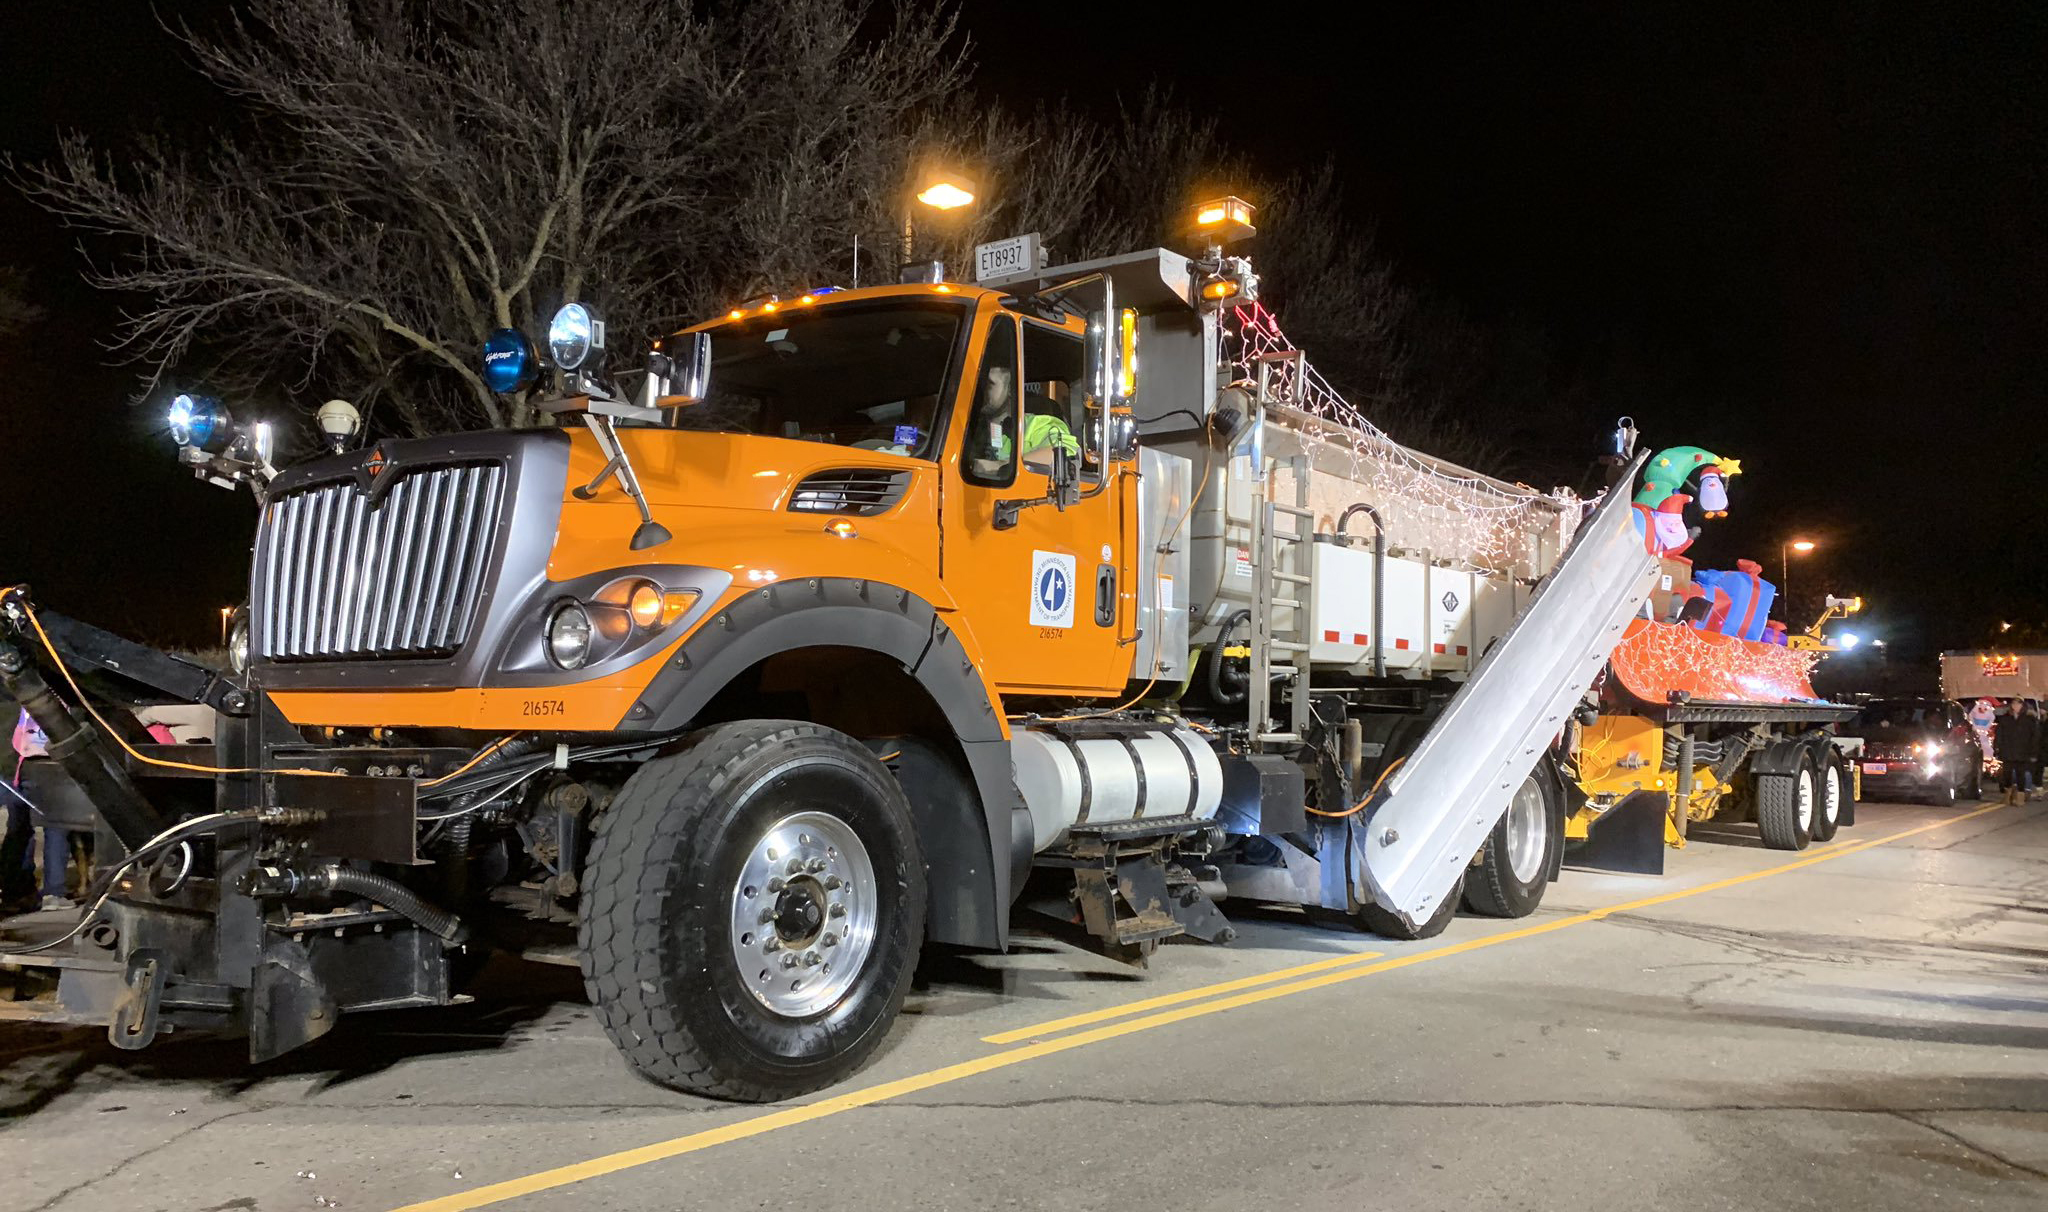 Photo: a MnDOT snowplow covered in twinkling holiday lights